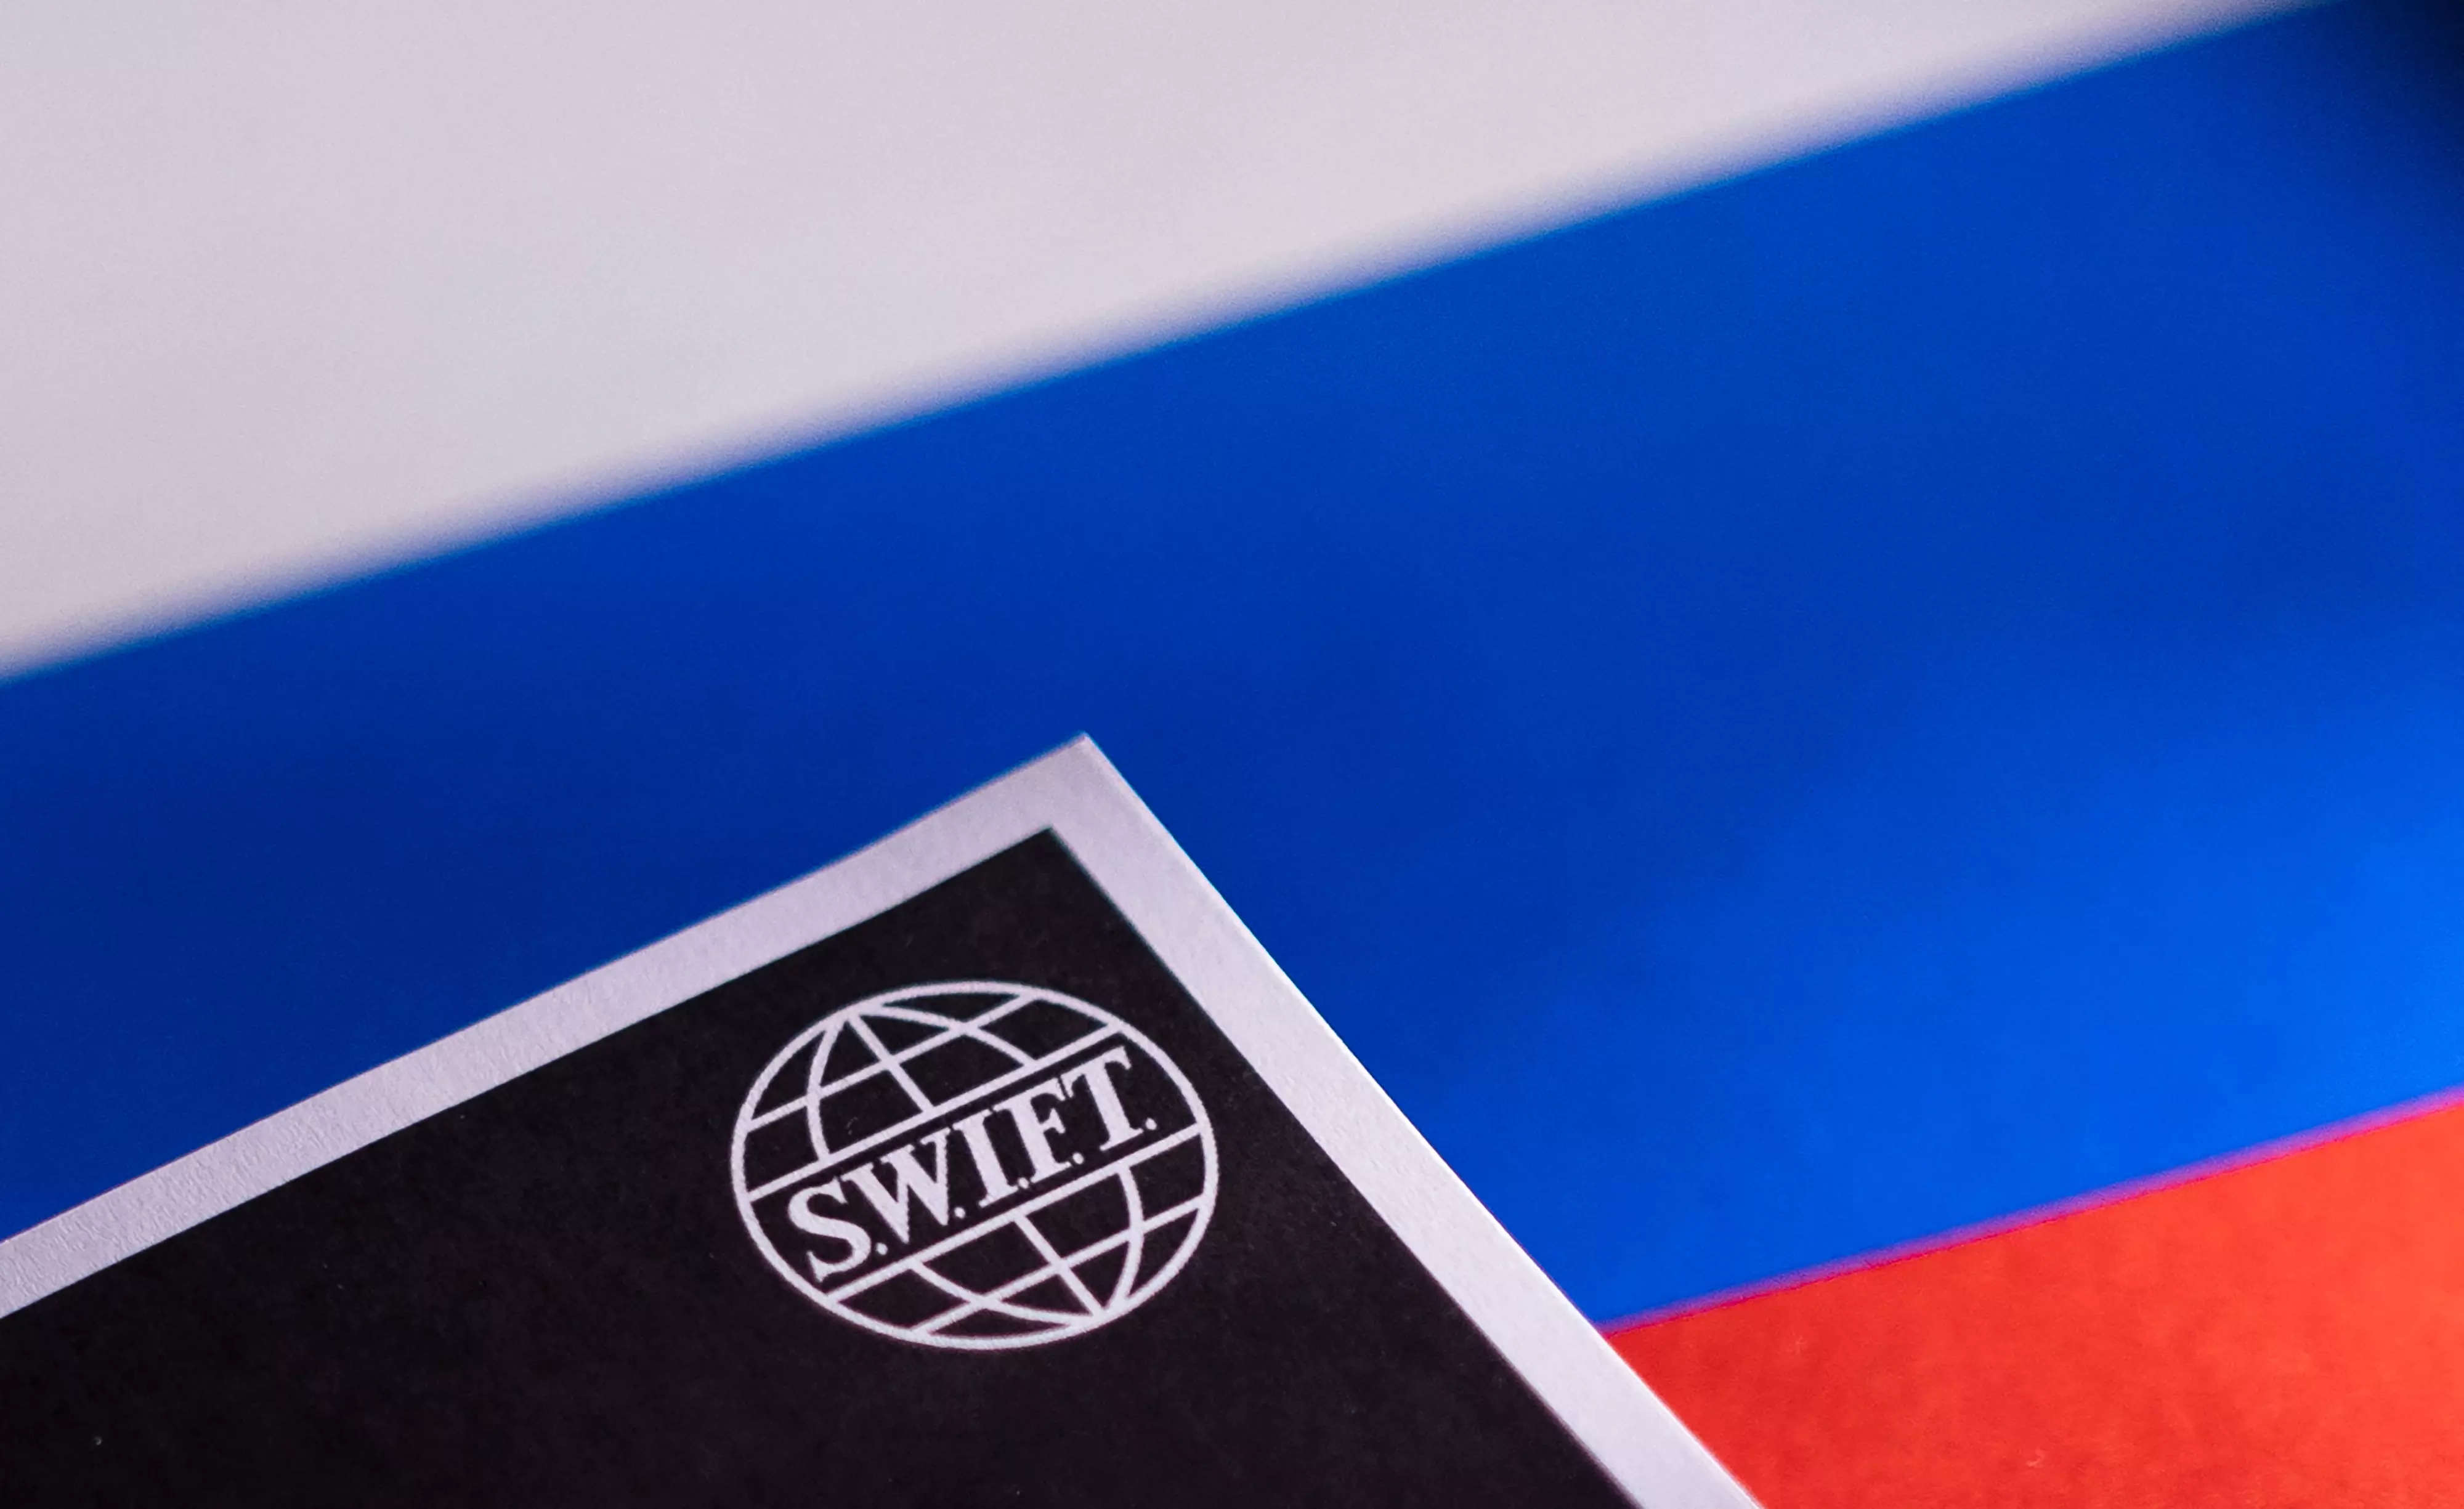 SWIFT says it preparing to comply with curbs on Russian banks